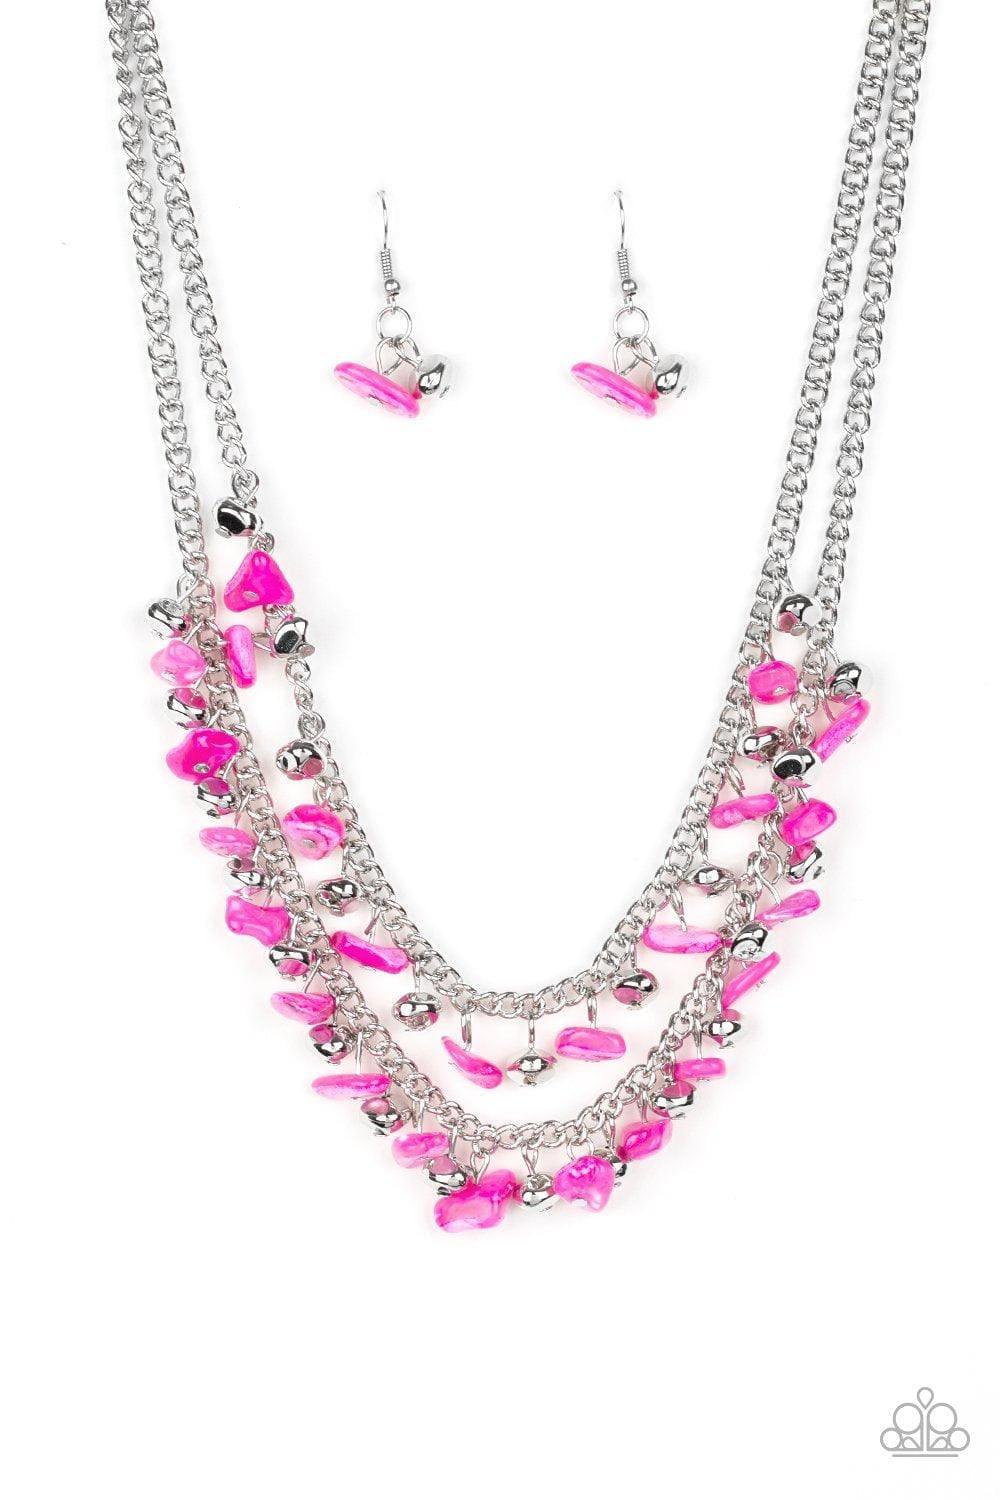 Paparazzi Accessories - Pebble Pioneer - Pink Necklace - Bling by JessieK